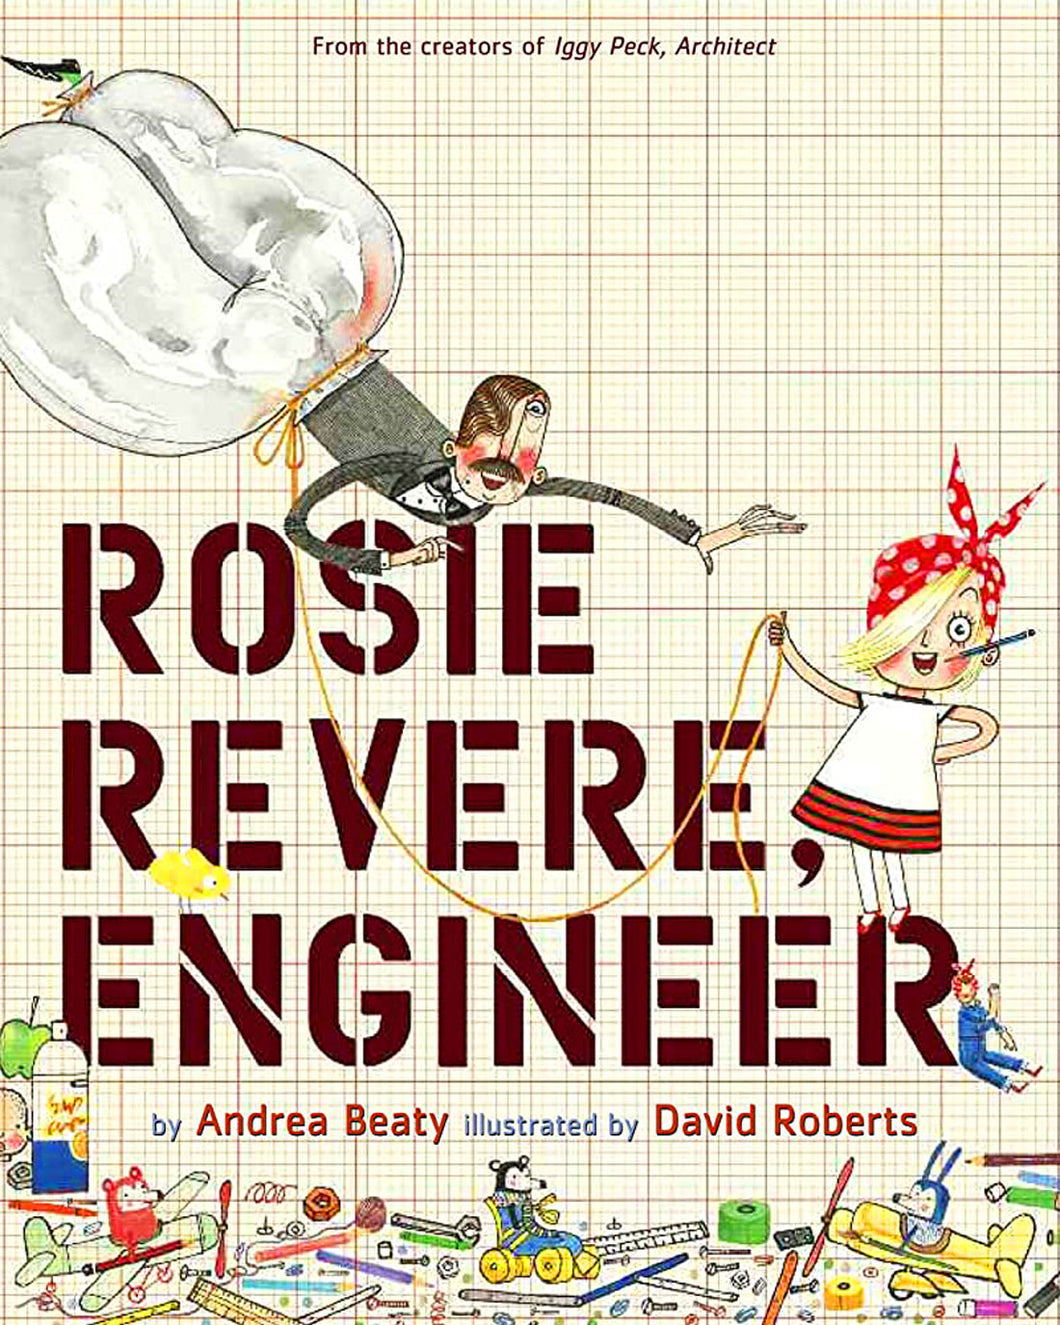 Rosie Revere, Engineer by Andrea Beaty / Hardcover- NEW BOOK